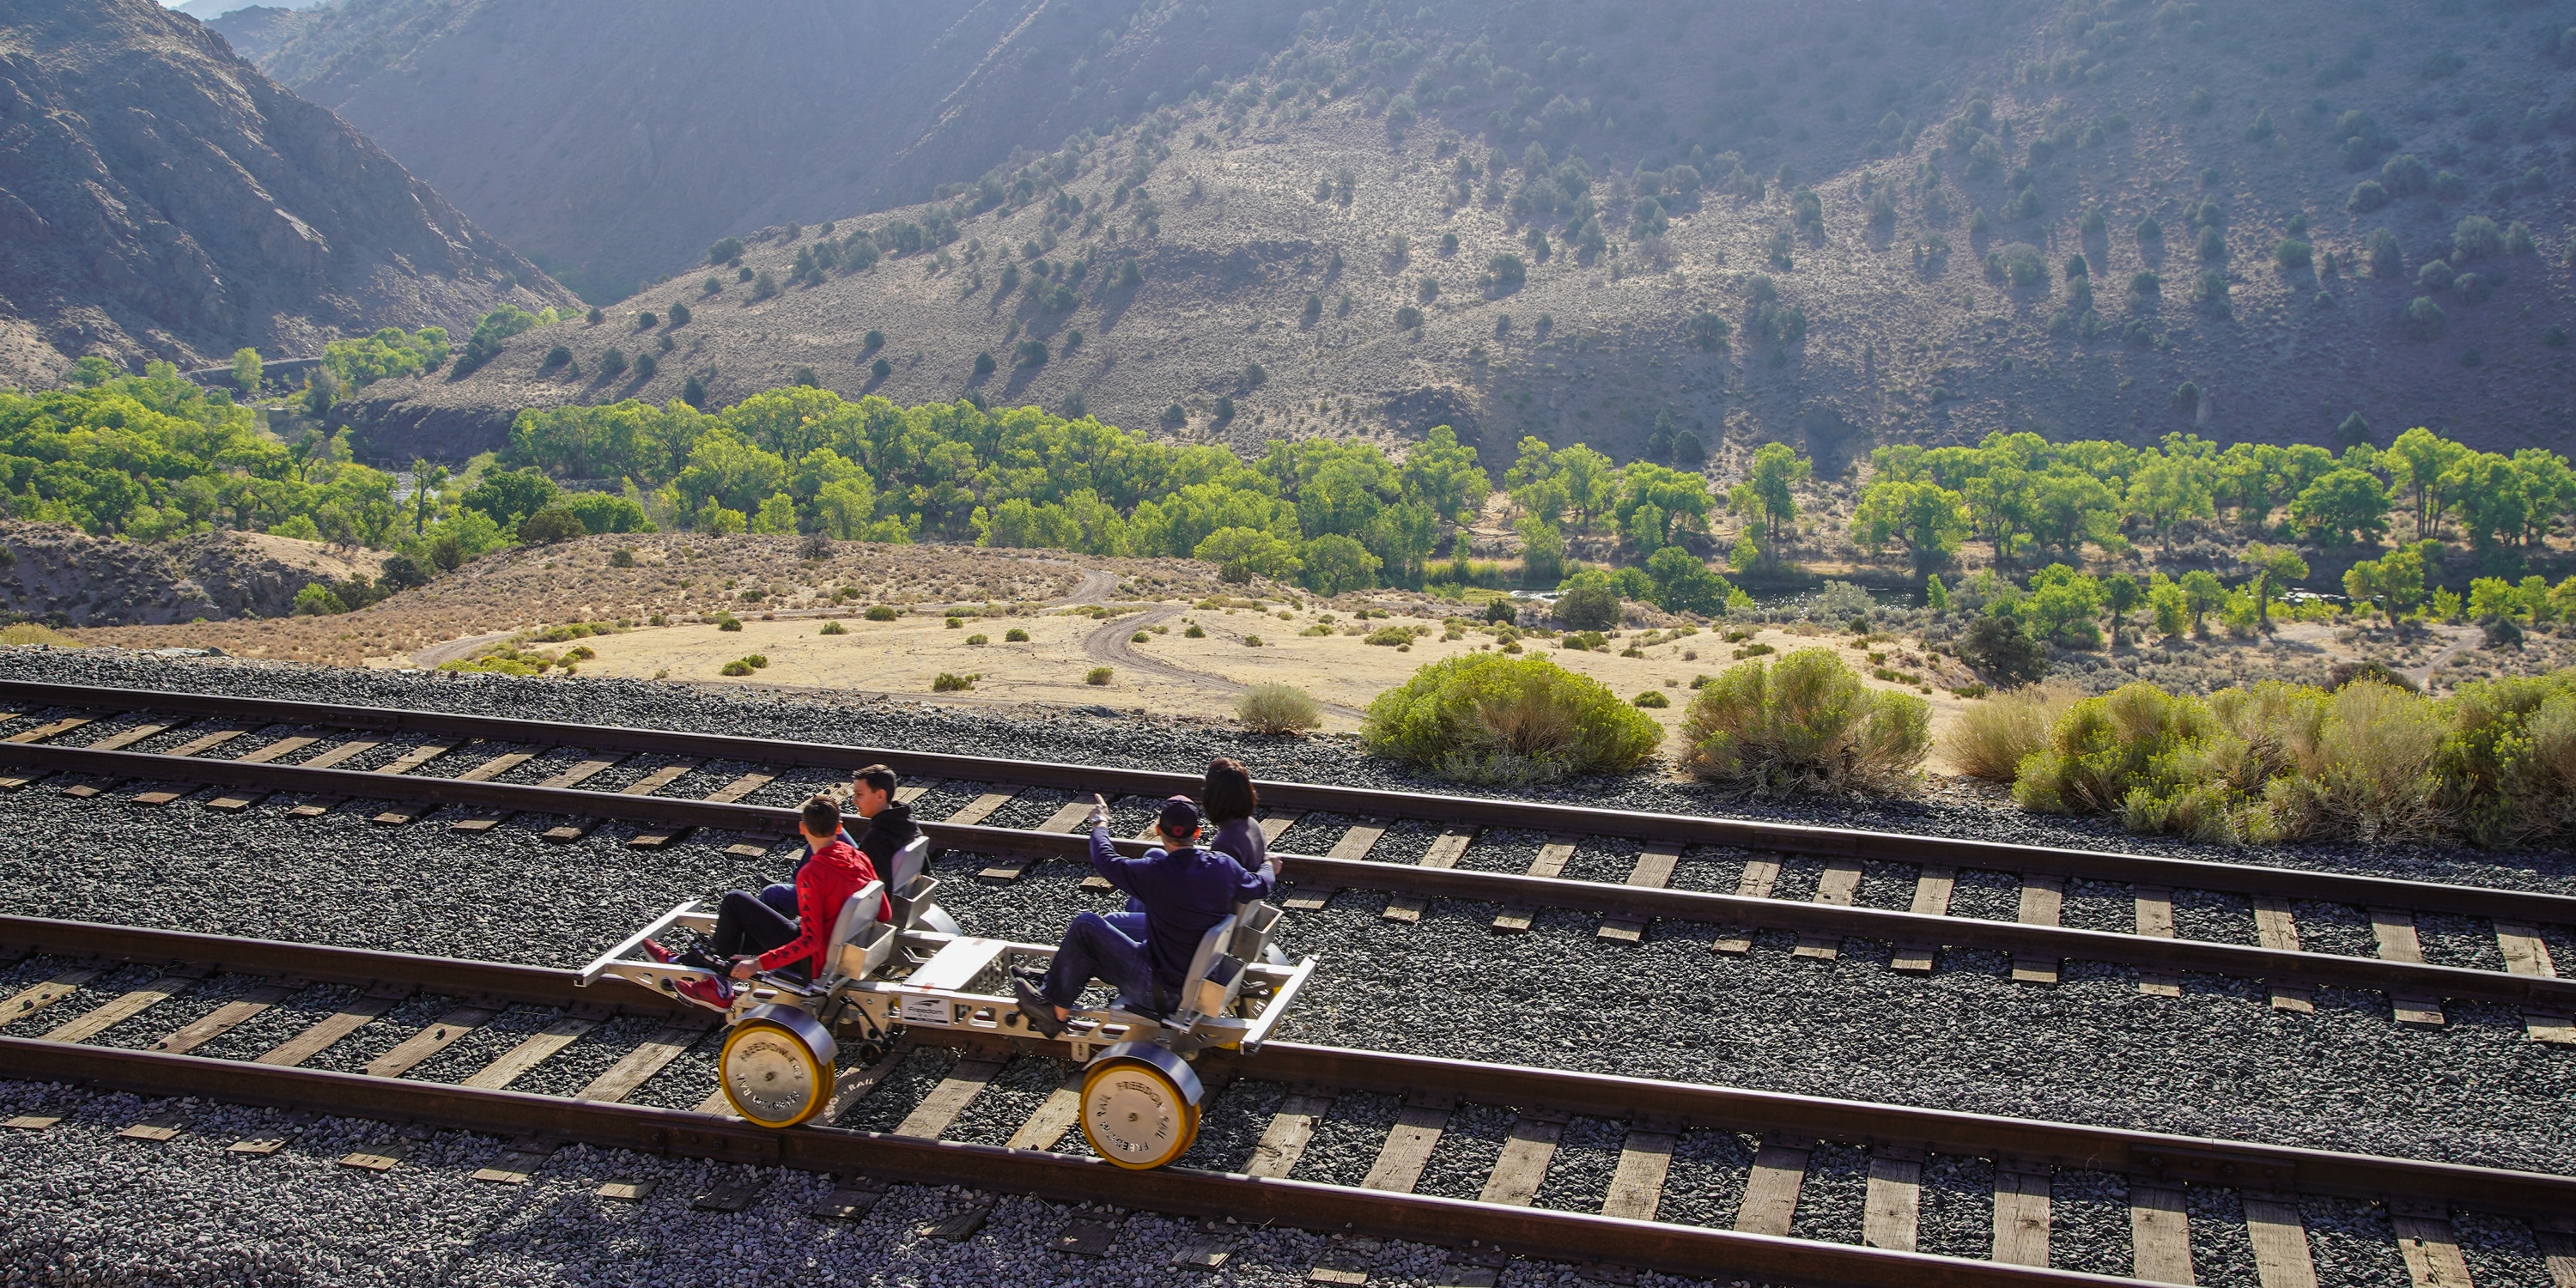 Railbike Adventures in the West